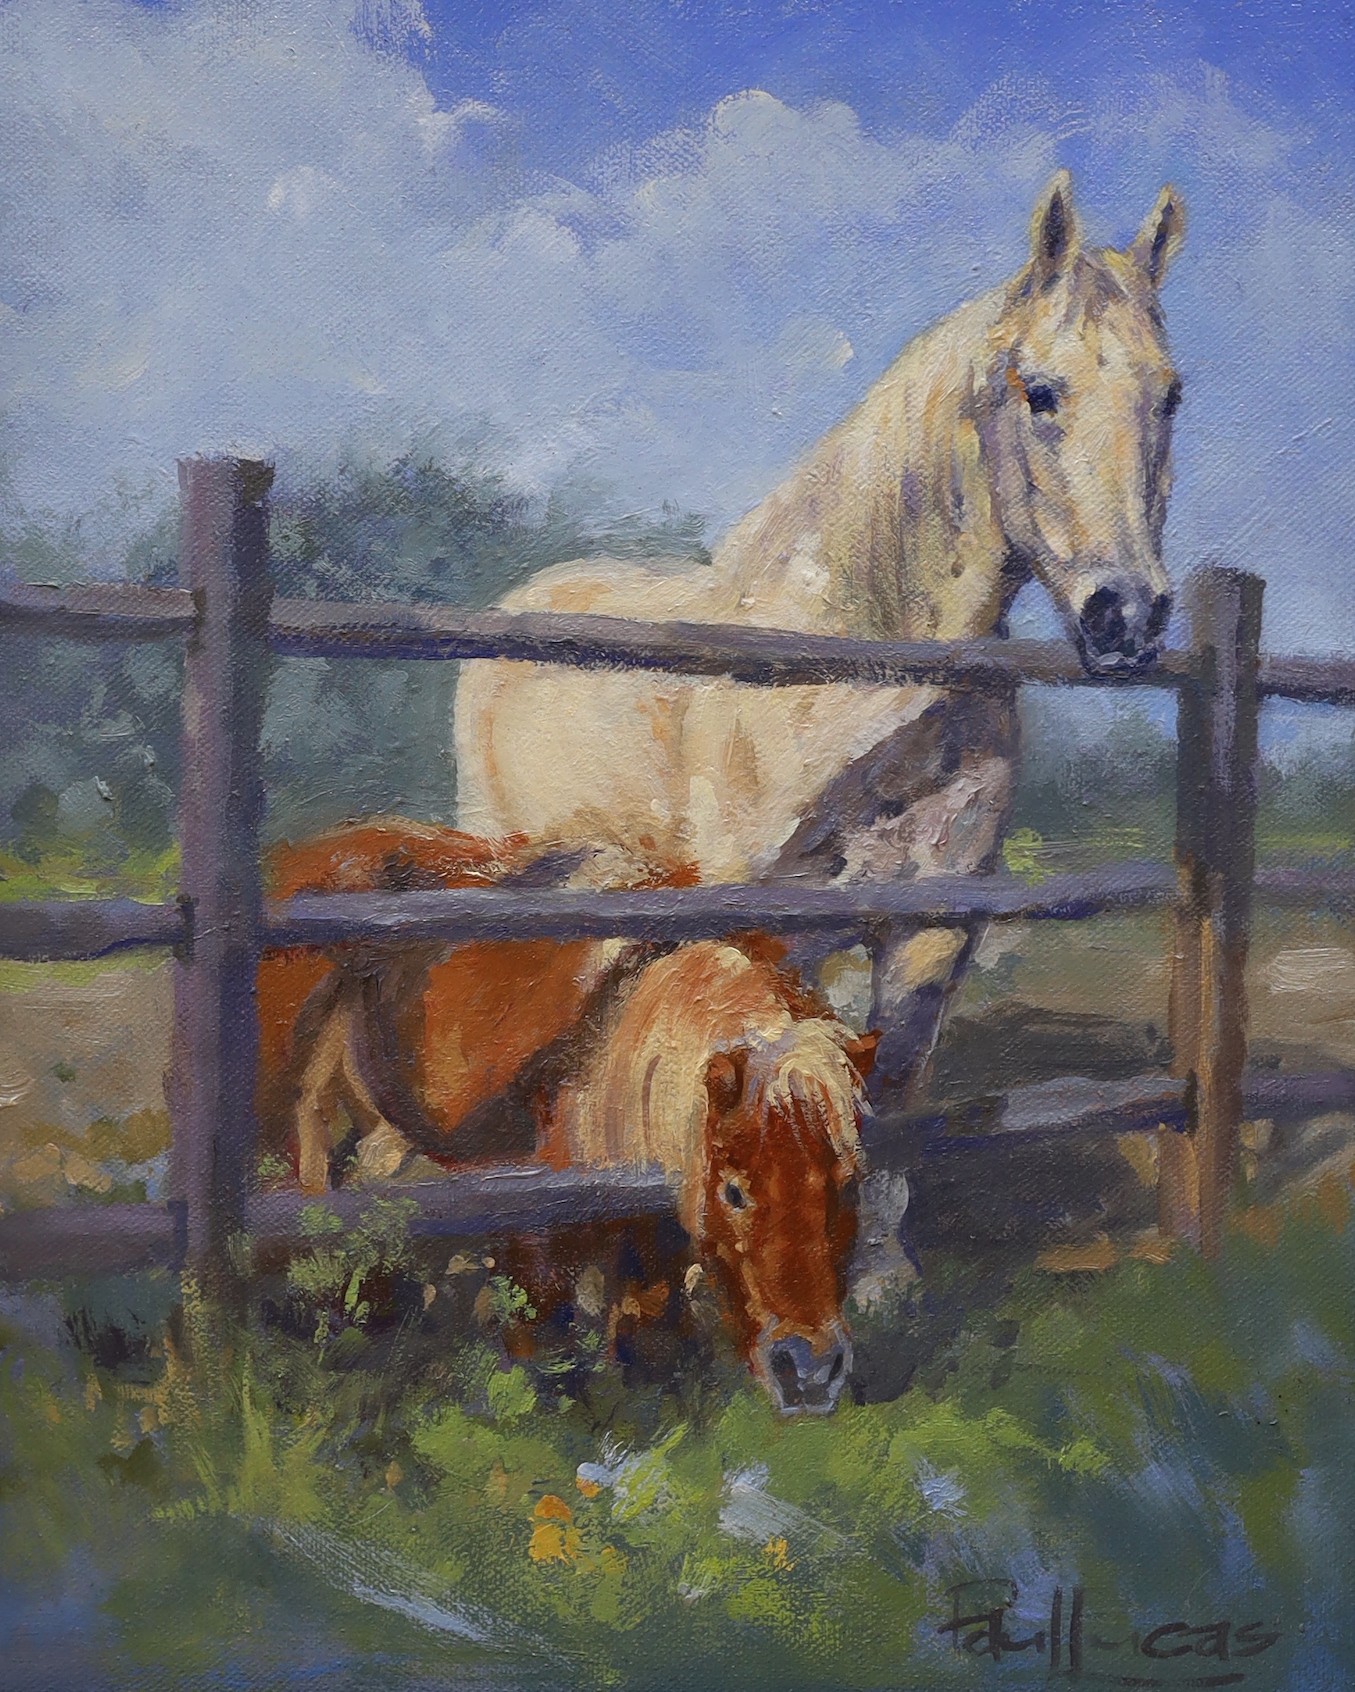 Paul Lucas ASEA, oil on canvas, Ponies beside a fence, signed, 29 x 24cm